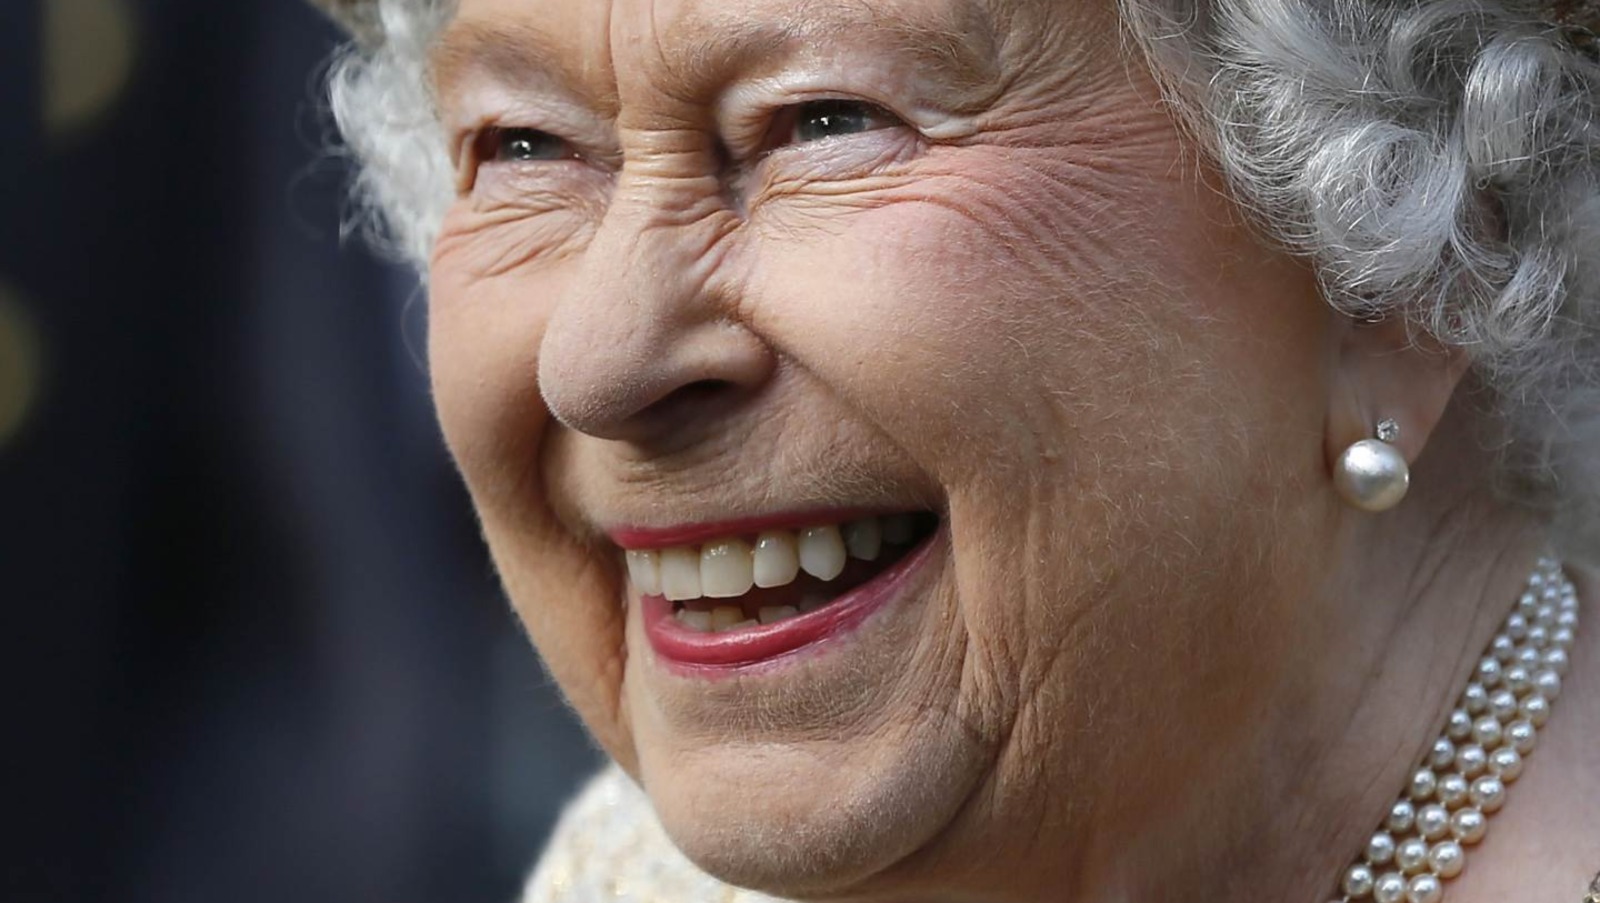 Queen Elizabeth II: Facts and Figures About Her Life